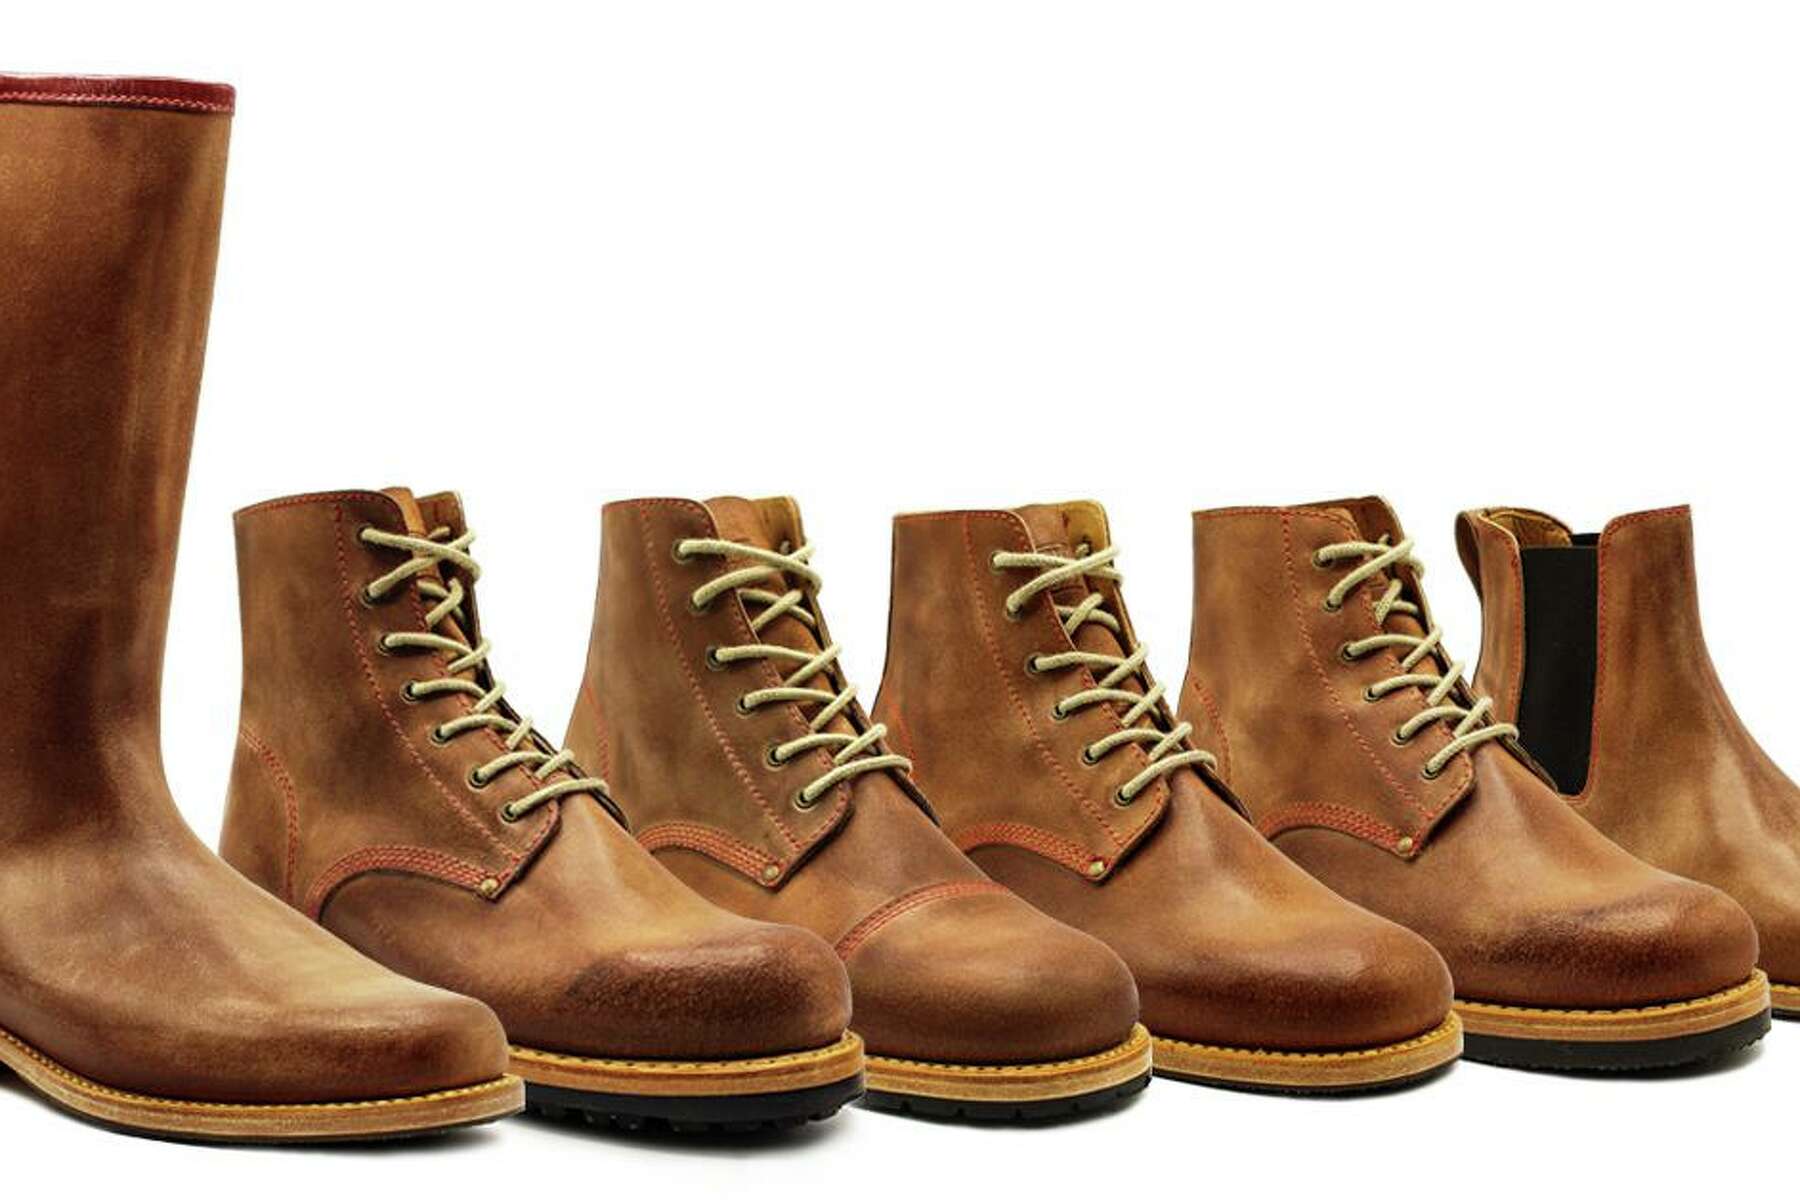 hjemmelevering Army Periodisk Portuguese brand Urban Shepherd Boots now based in Houston